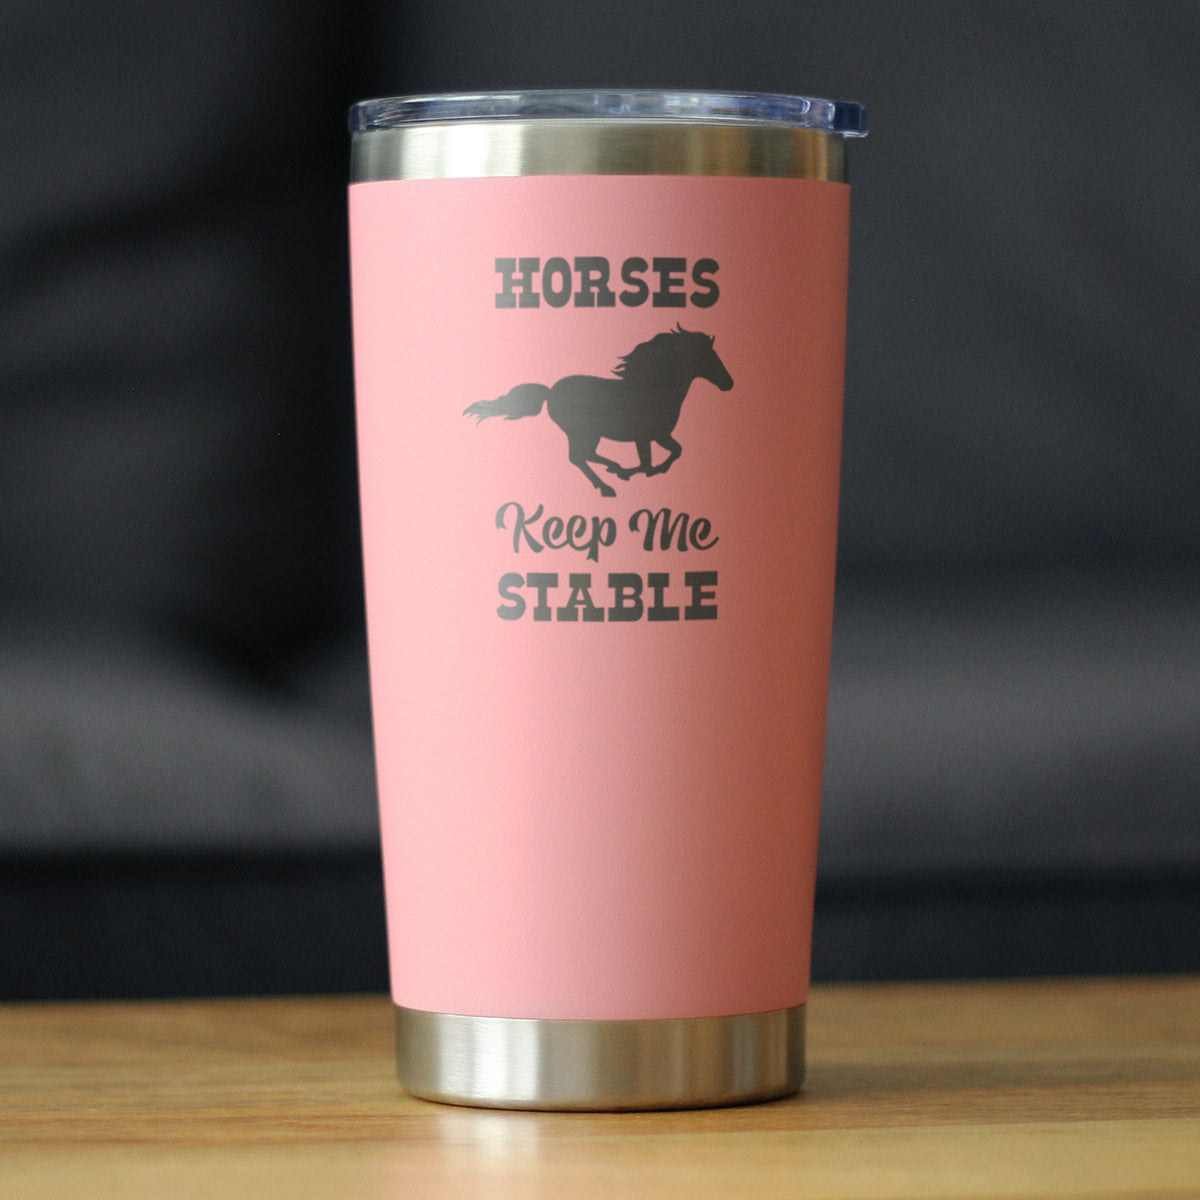 Horses Keep Me Stable - Insulated Coffee Tumbler Cup with Sliding Lid - Stainless Steel Insulated Mug - Horse Themed Coffee Gifts